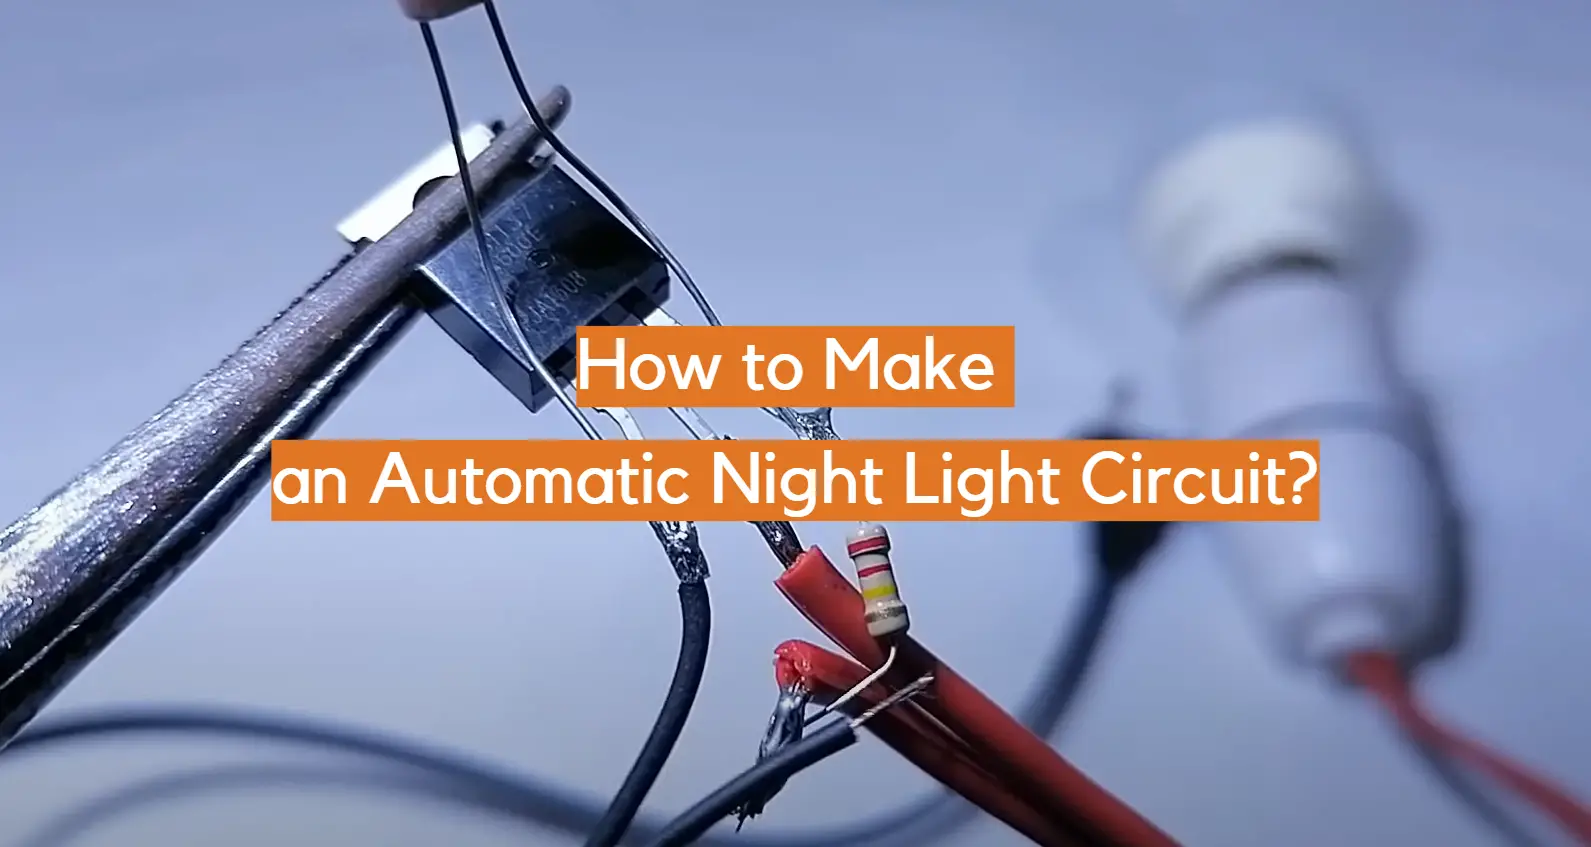 How to Make an Automatic Night Light Circuit?